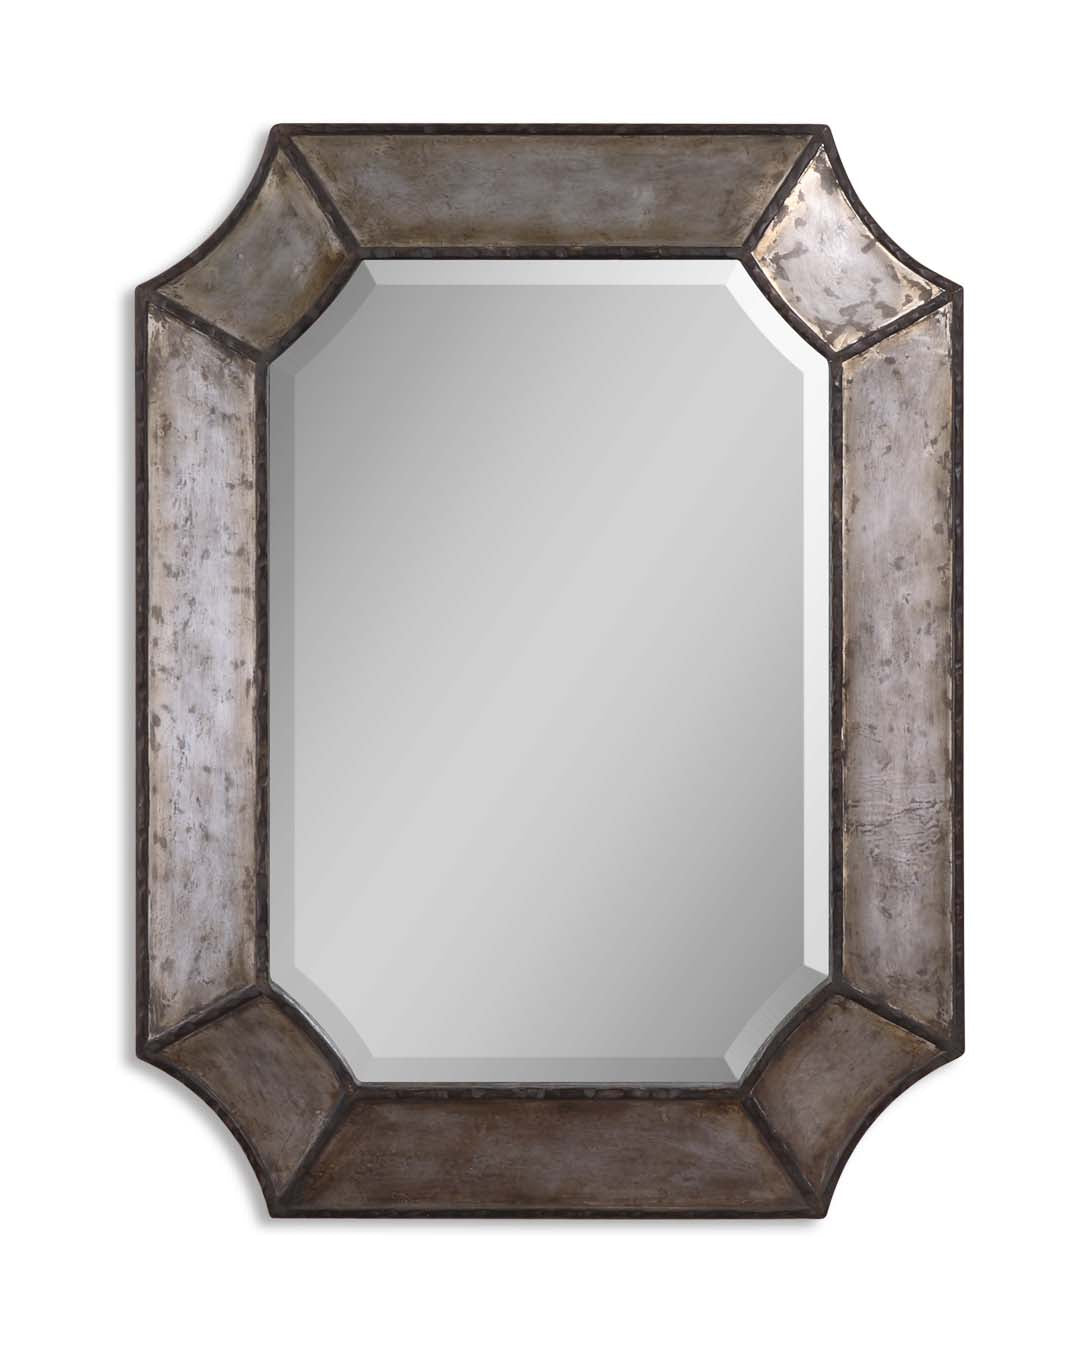 Frame Is Made Of Distressed, Hammered Aluminum With Burnished Edges And Rustic Bronze Details. Mirror Has A Generous 1 1/4...